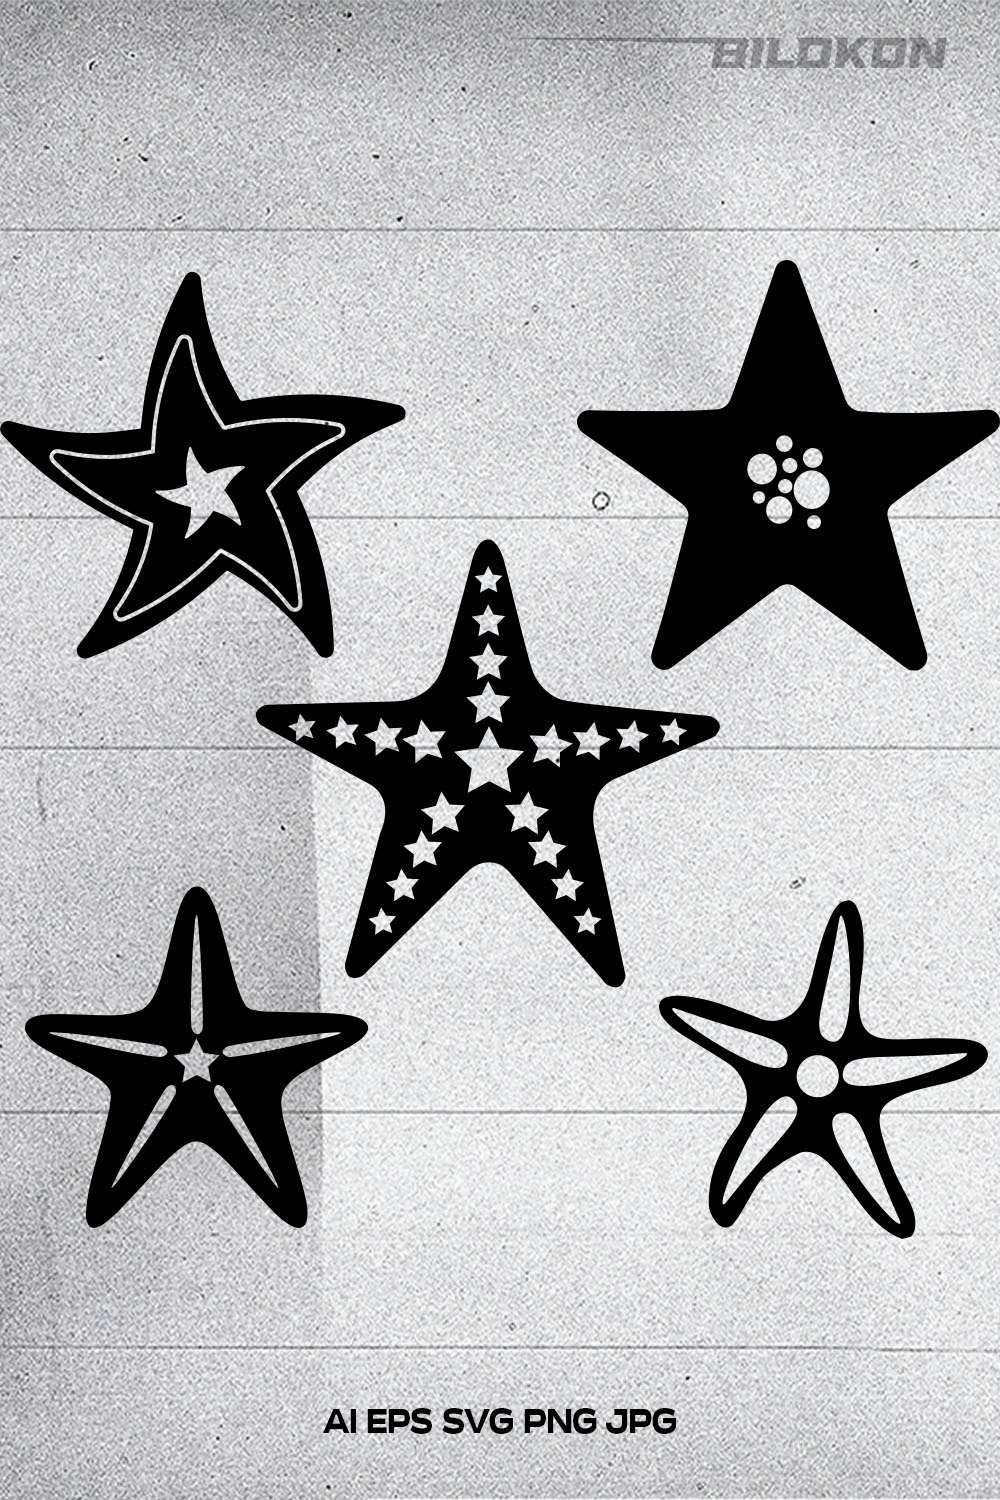 Bunch of stars that are on a piece of paper.